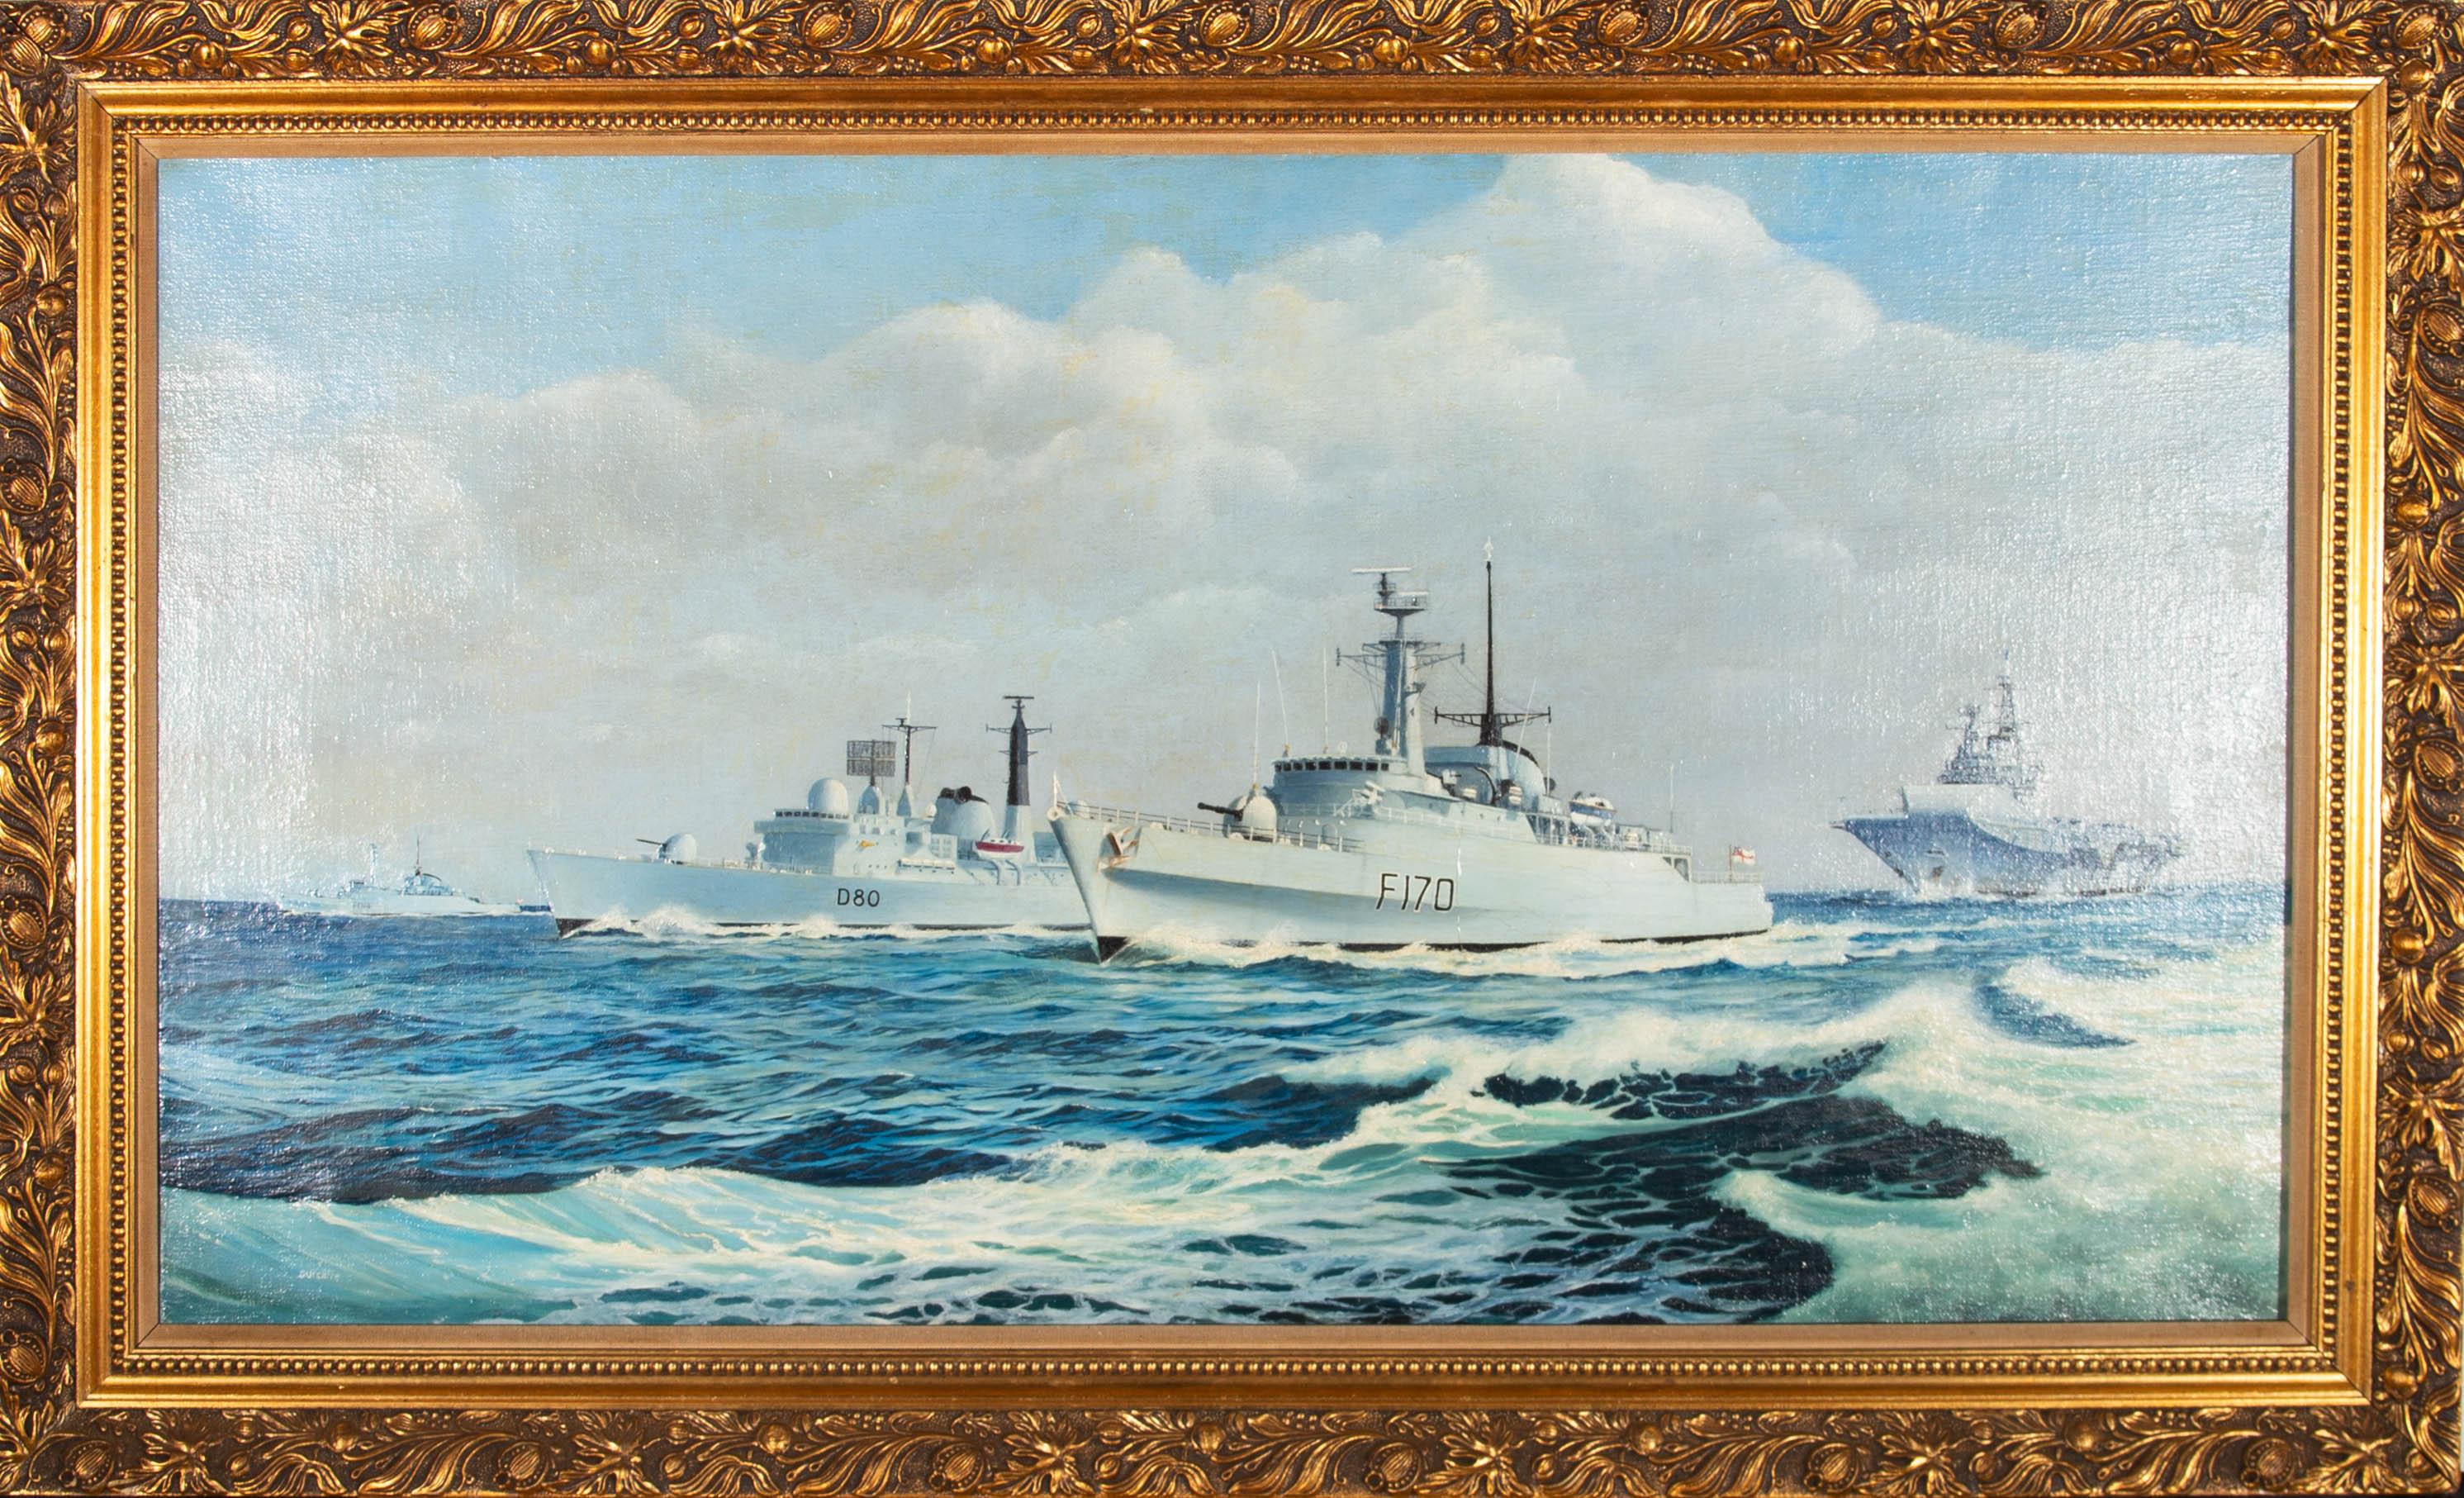 An attractive oil painting, depicting a seascape with four ships - HMS Antelope Type 21 frigate,
HMS Sheffield Type 42 and HMS Ardent Type 21
frigate followed by an aircraft carrier. Signed 'Sutcliffe' to the lower left-hand corner. Presented in a